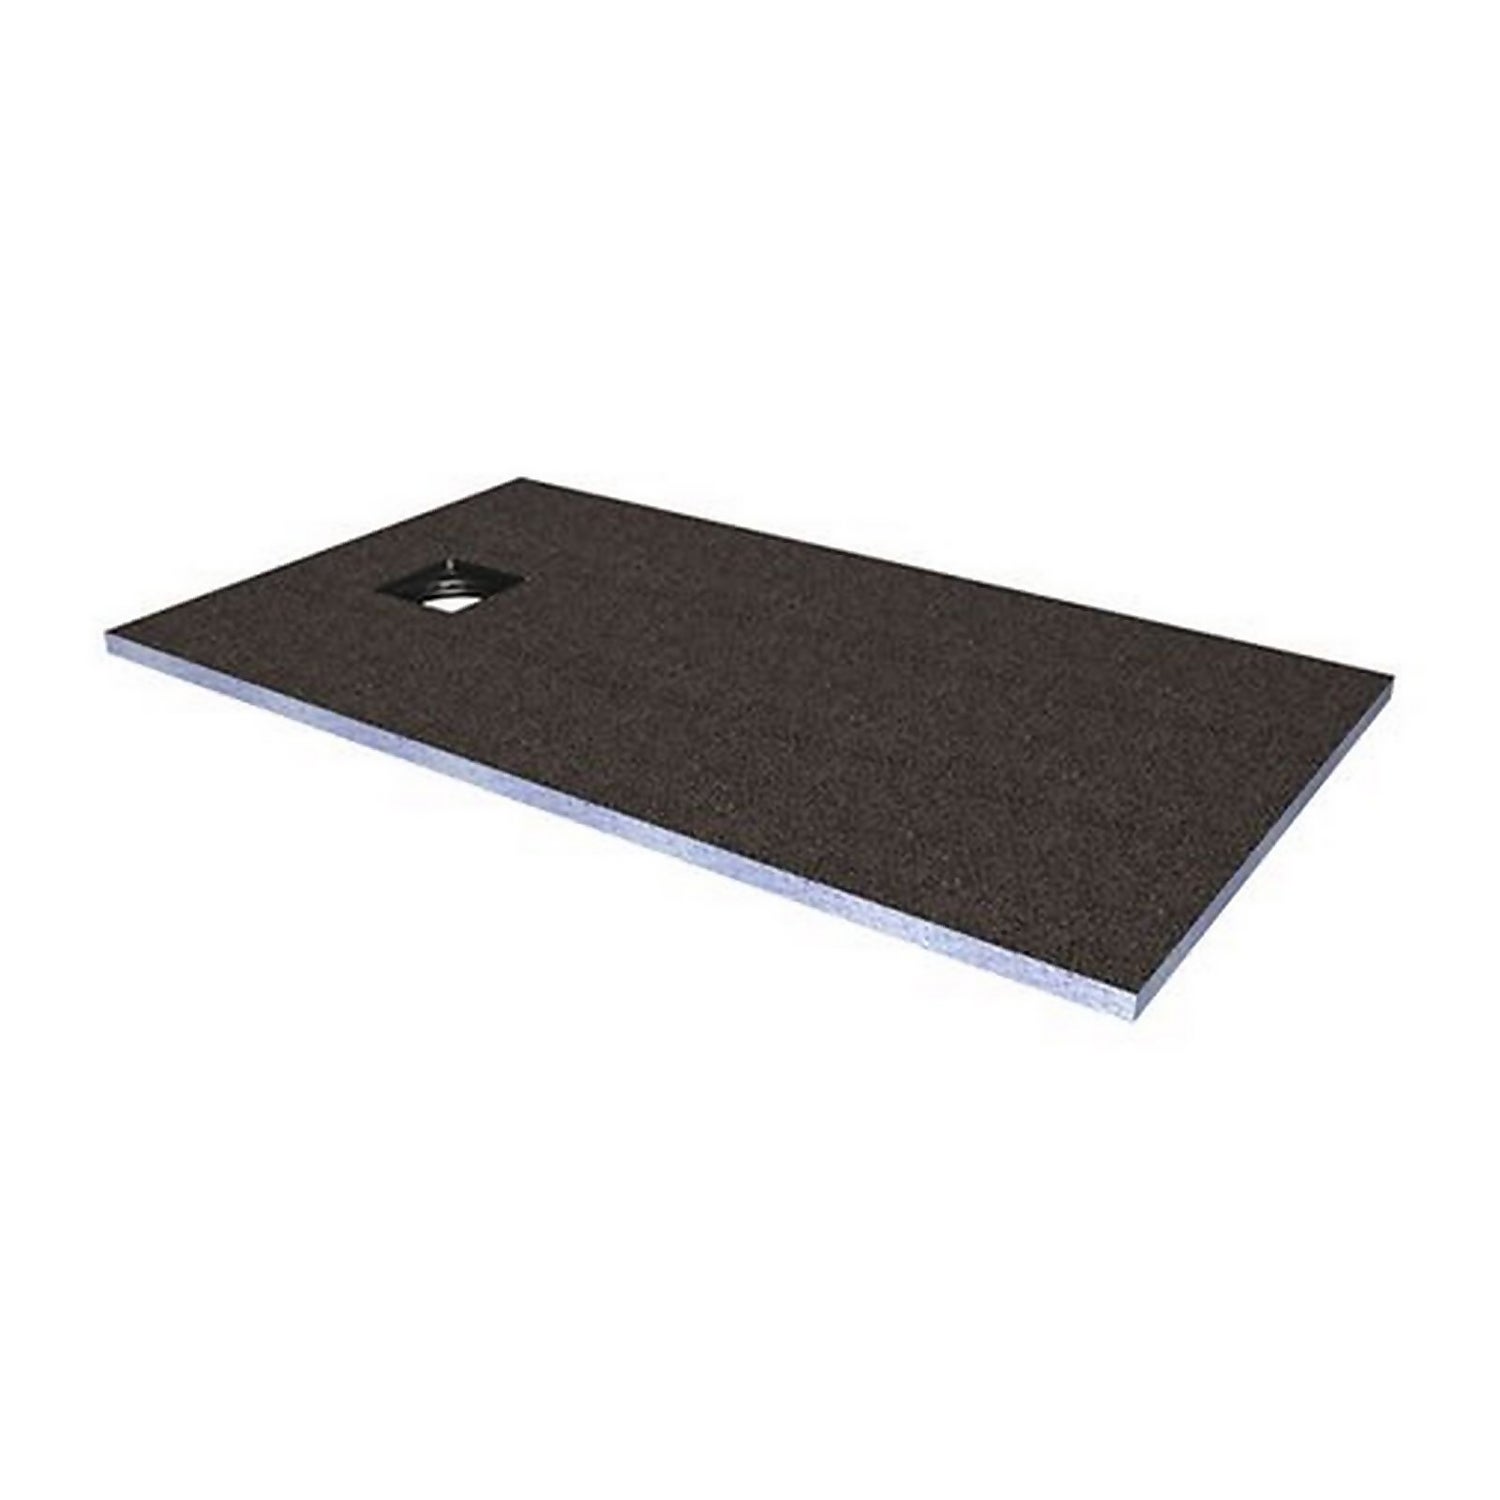 Square End Drain Wet room Tray 1600 x 900mm